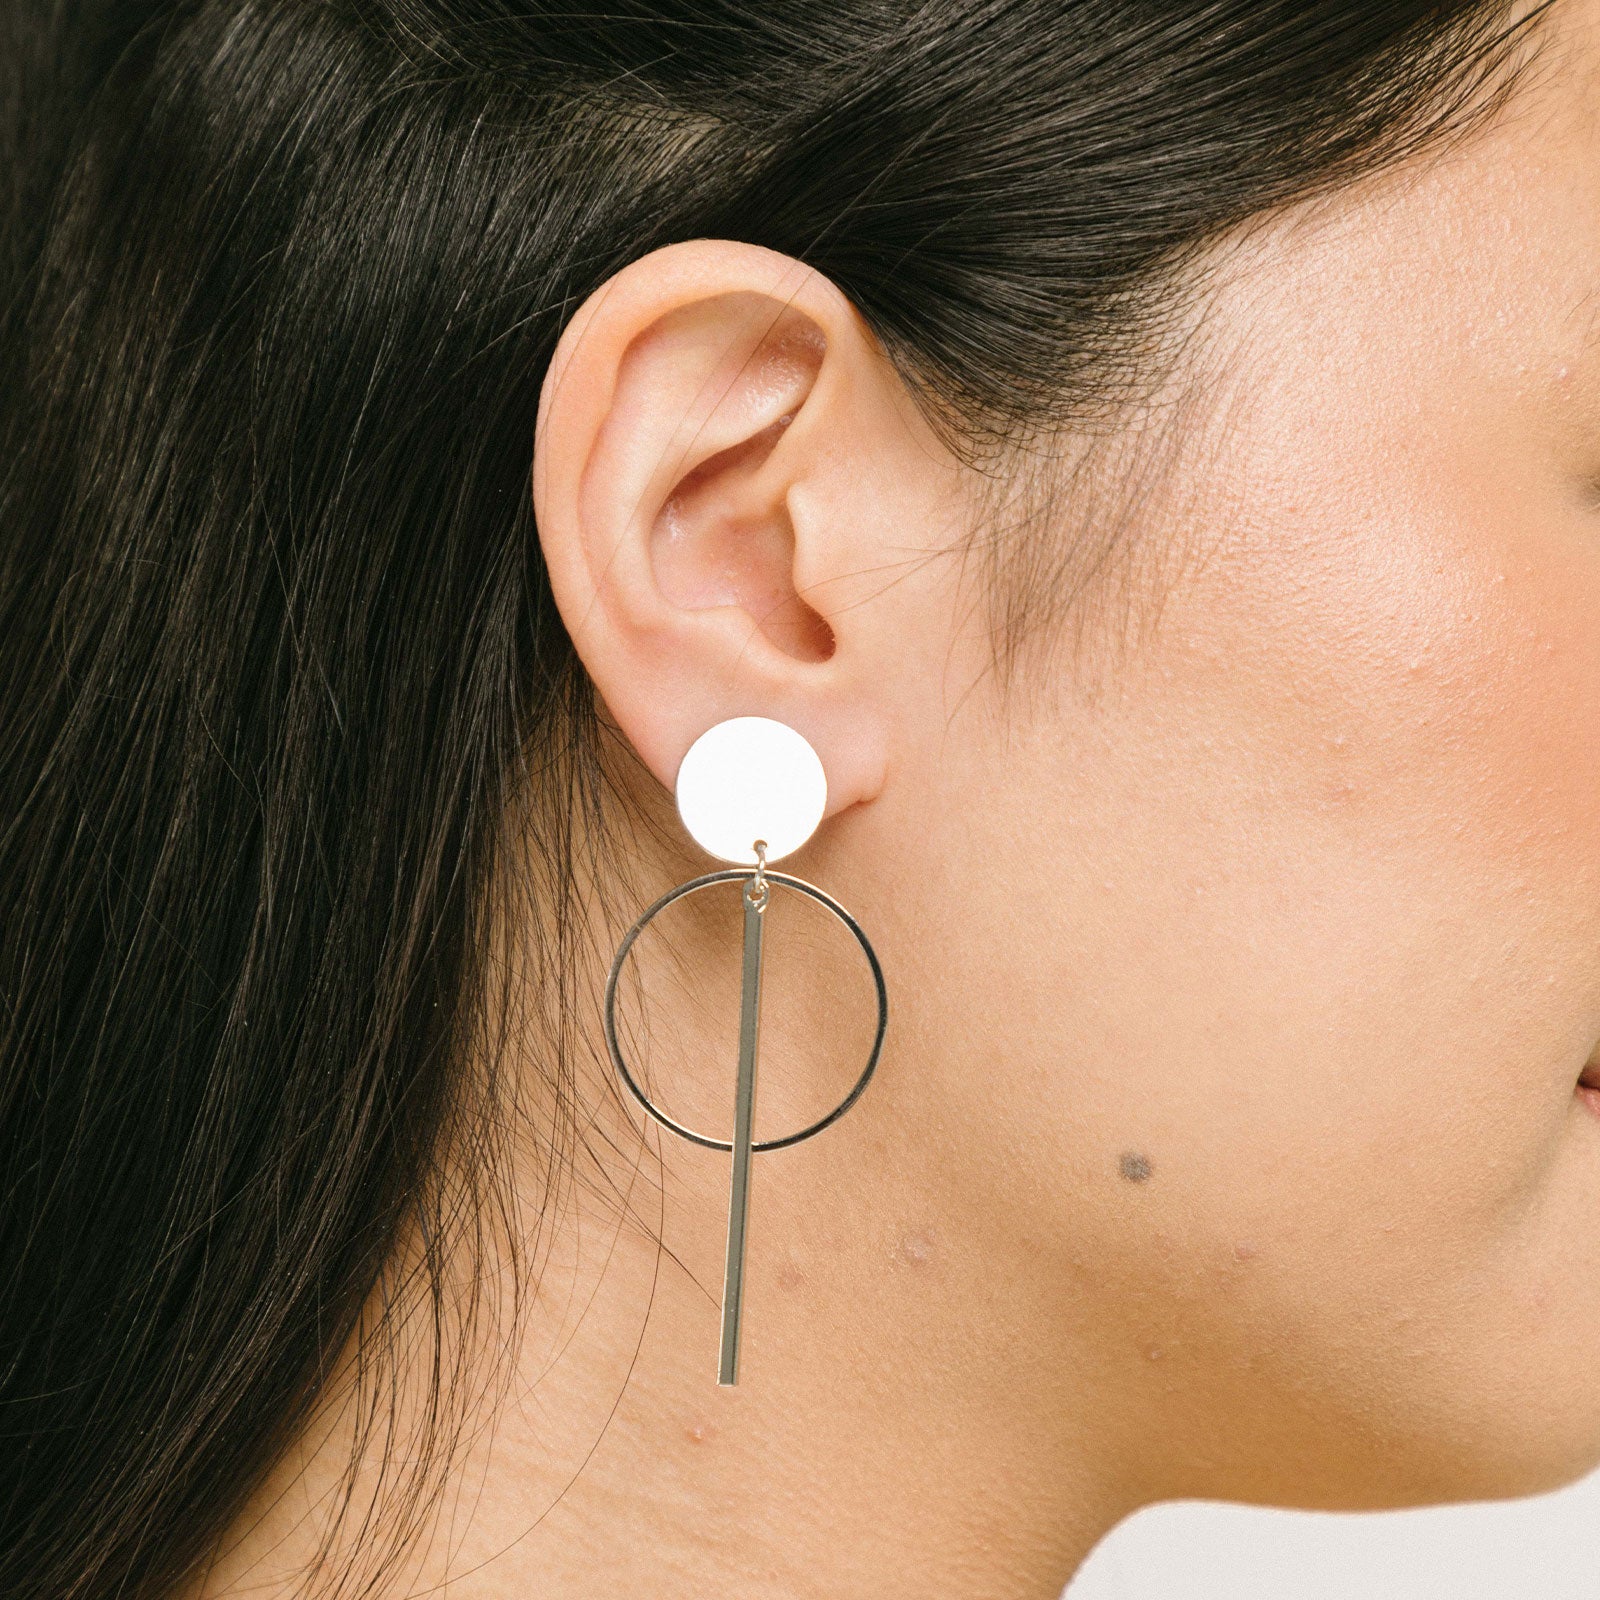 A model wearing the Melissa Clip-On Earrings offer a secure hold, with an average comfortable wear duration of 8-12 hours. The closure type is padded for a secure fit that accommodates all ear types, including thick/large ears, sensitive ears, small/thin ears, and stretched/healing ears. Constructed from gold tone/silver tone plated zinc alloy, each pair includes removable rubber padding.